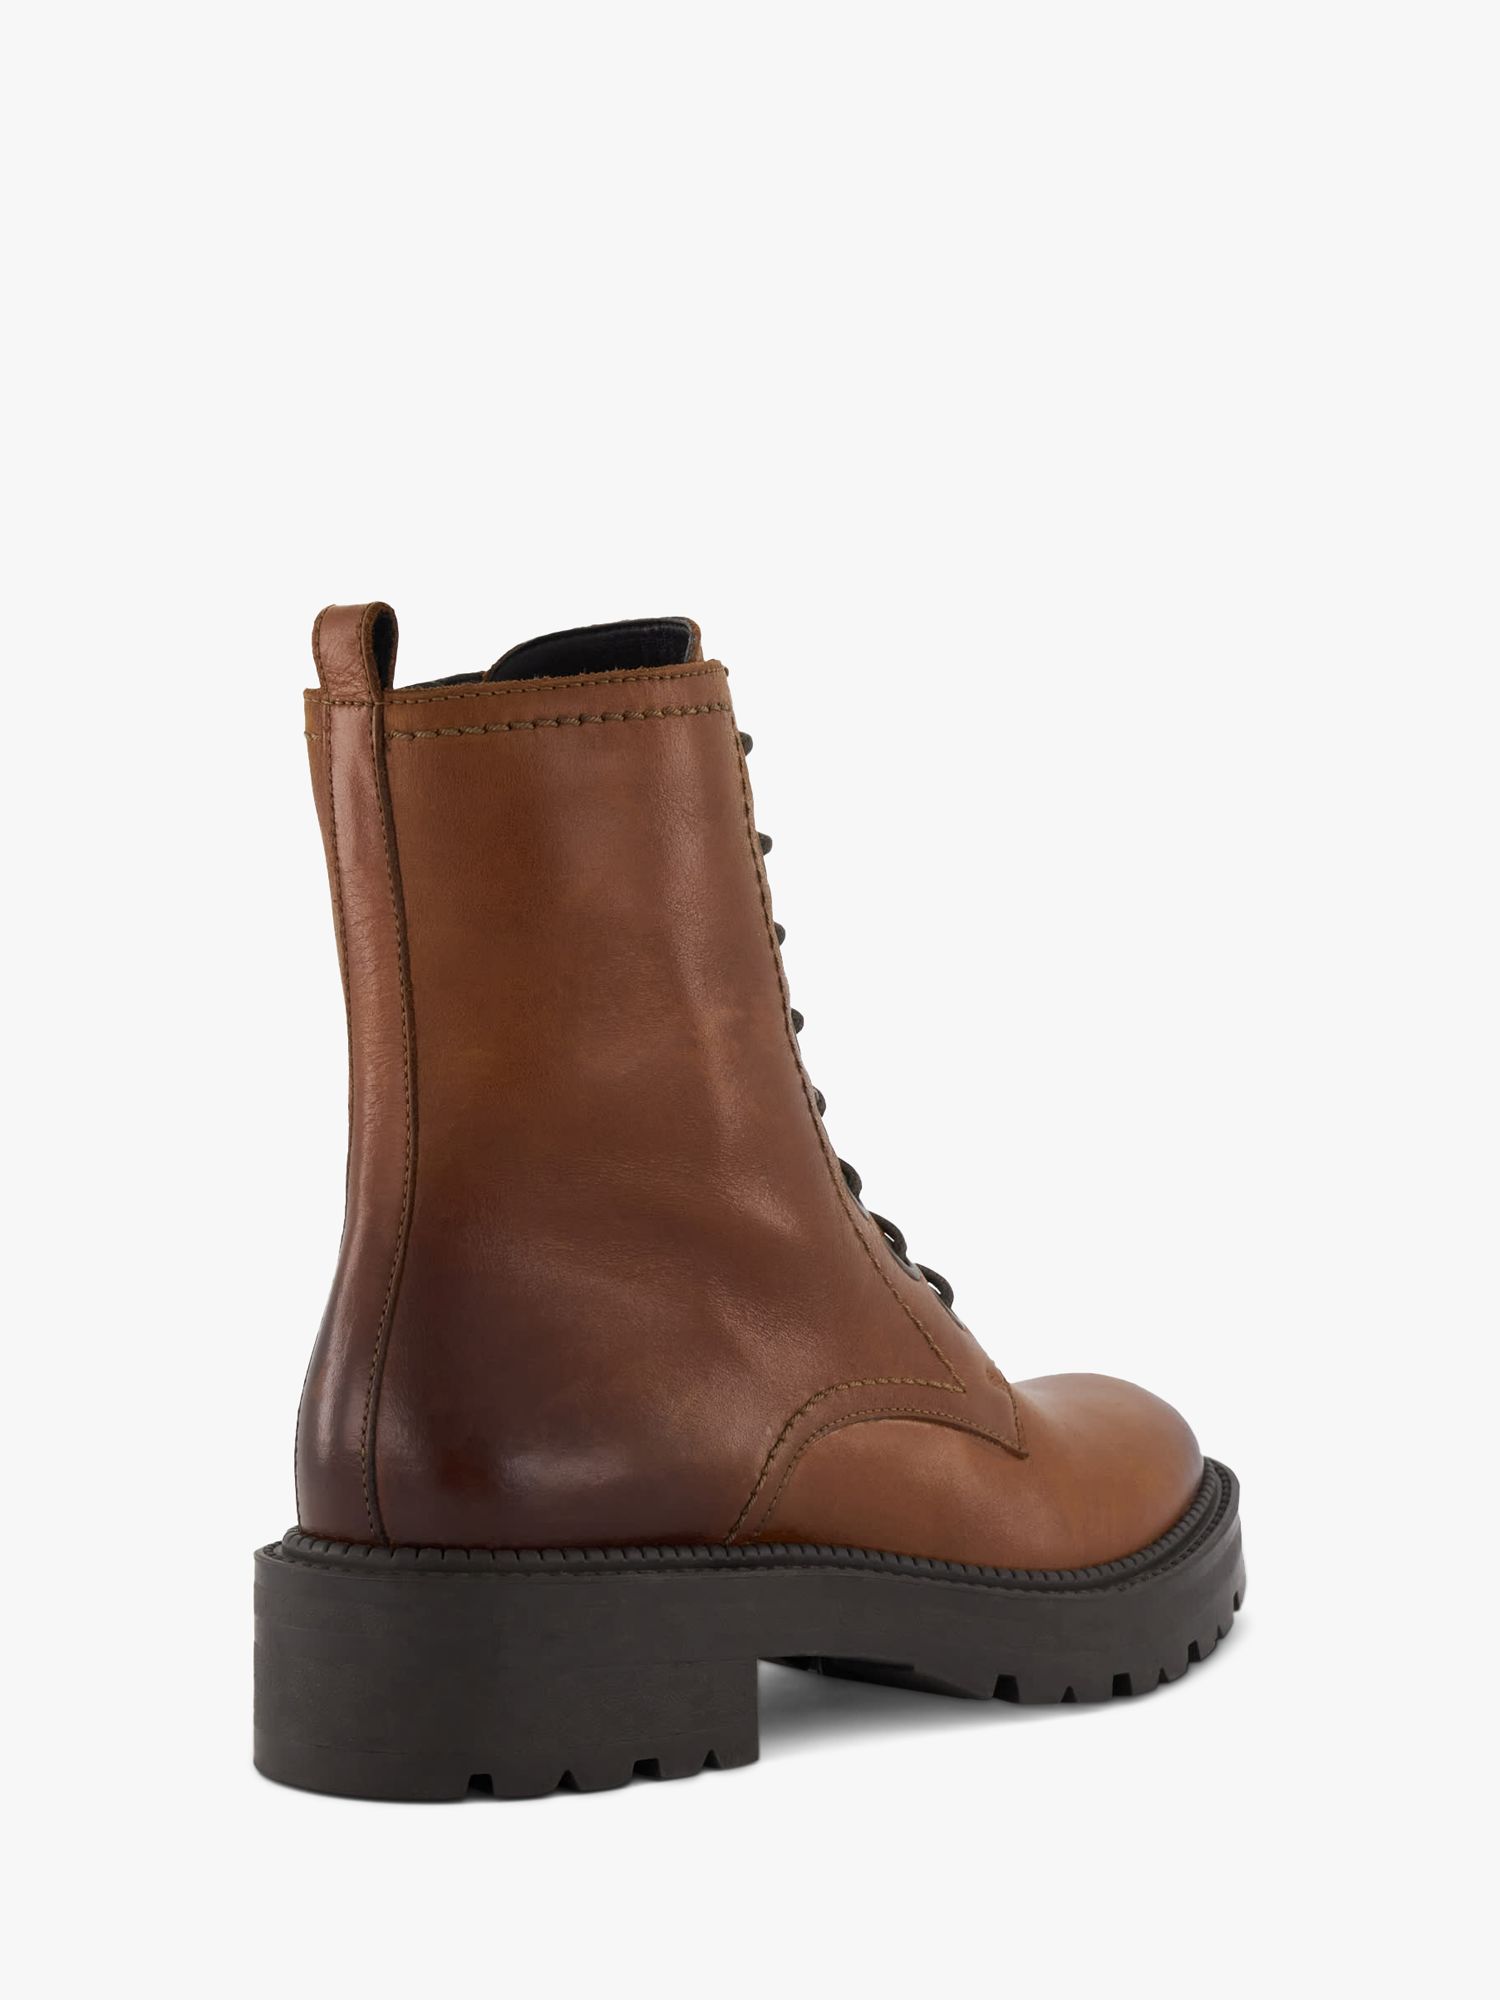 Dune Press Leather Cleated Hiker Boots, Tan at John Lewis & Partners